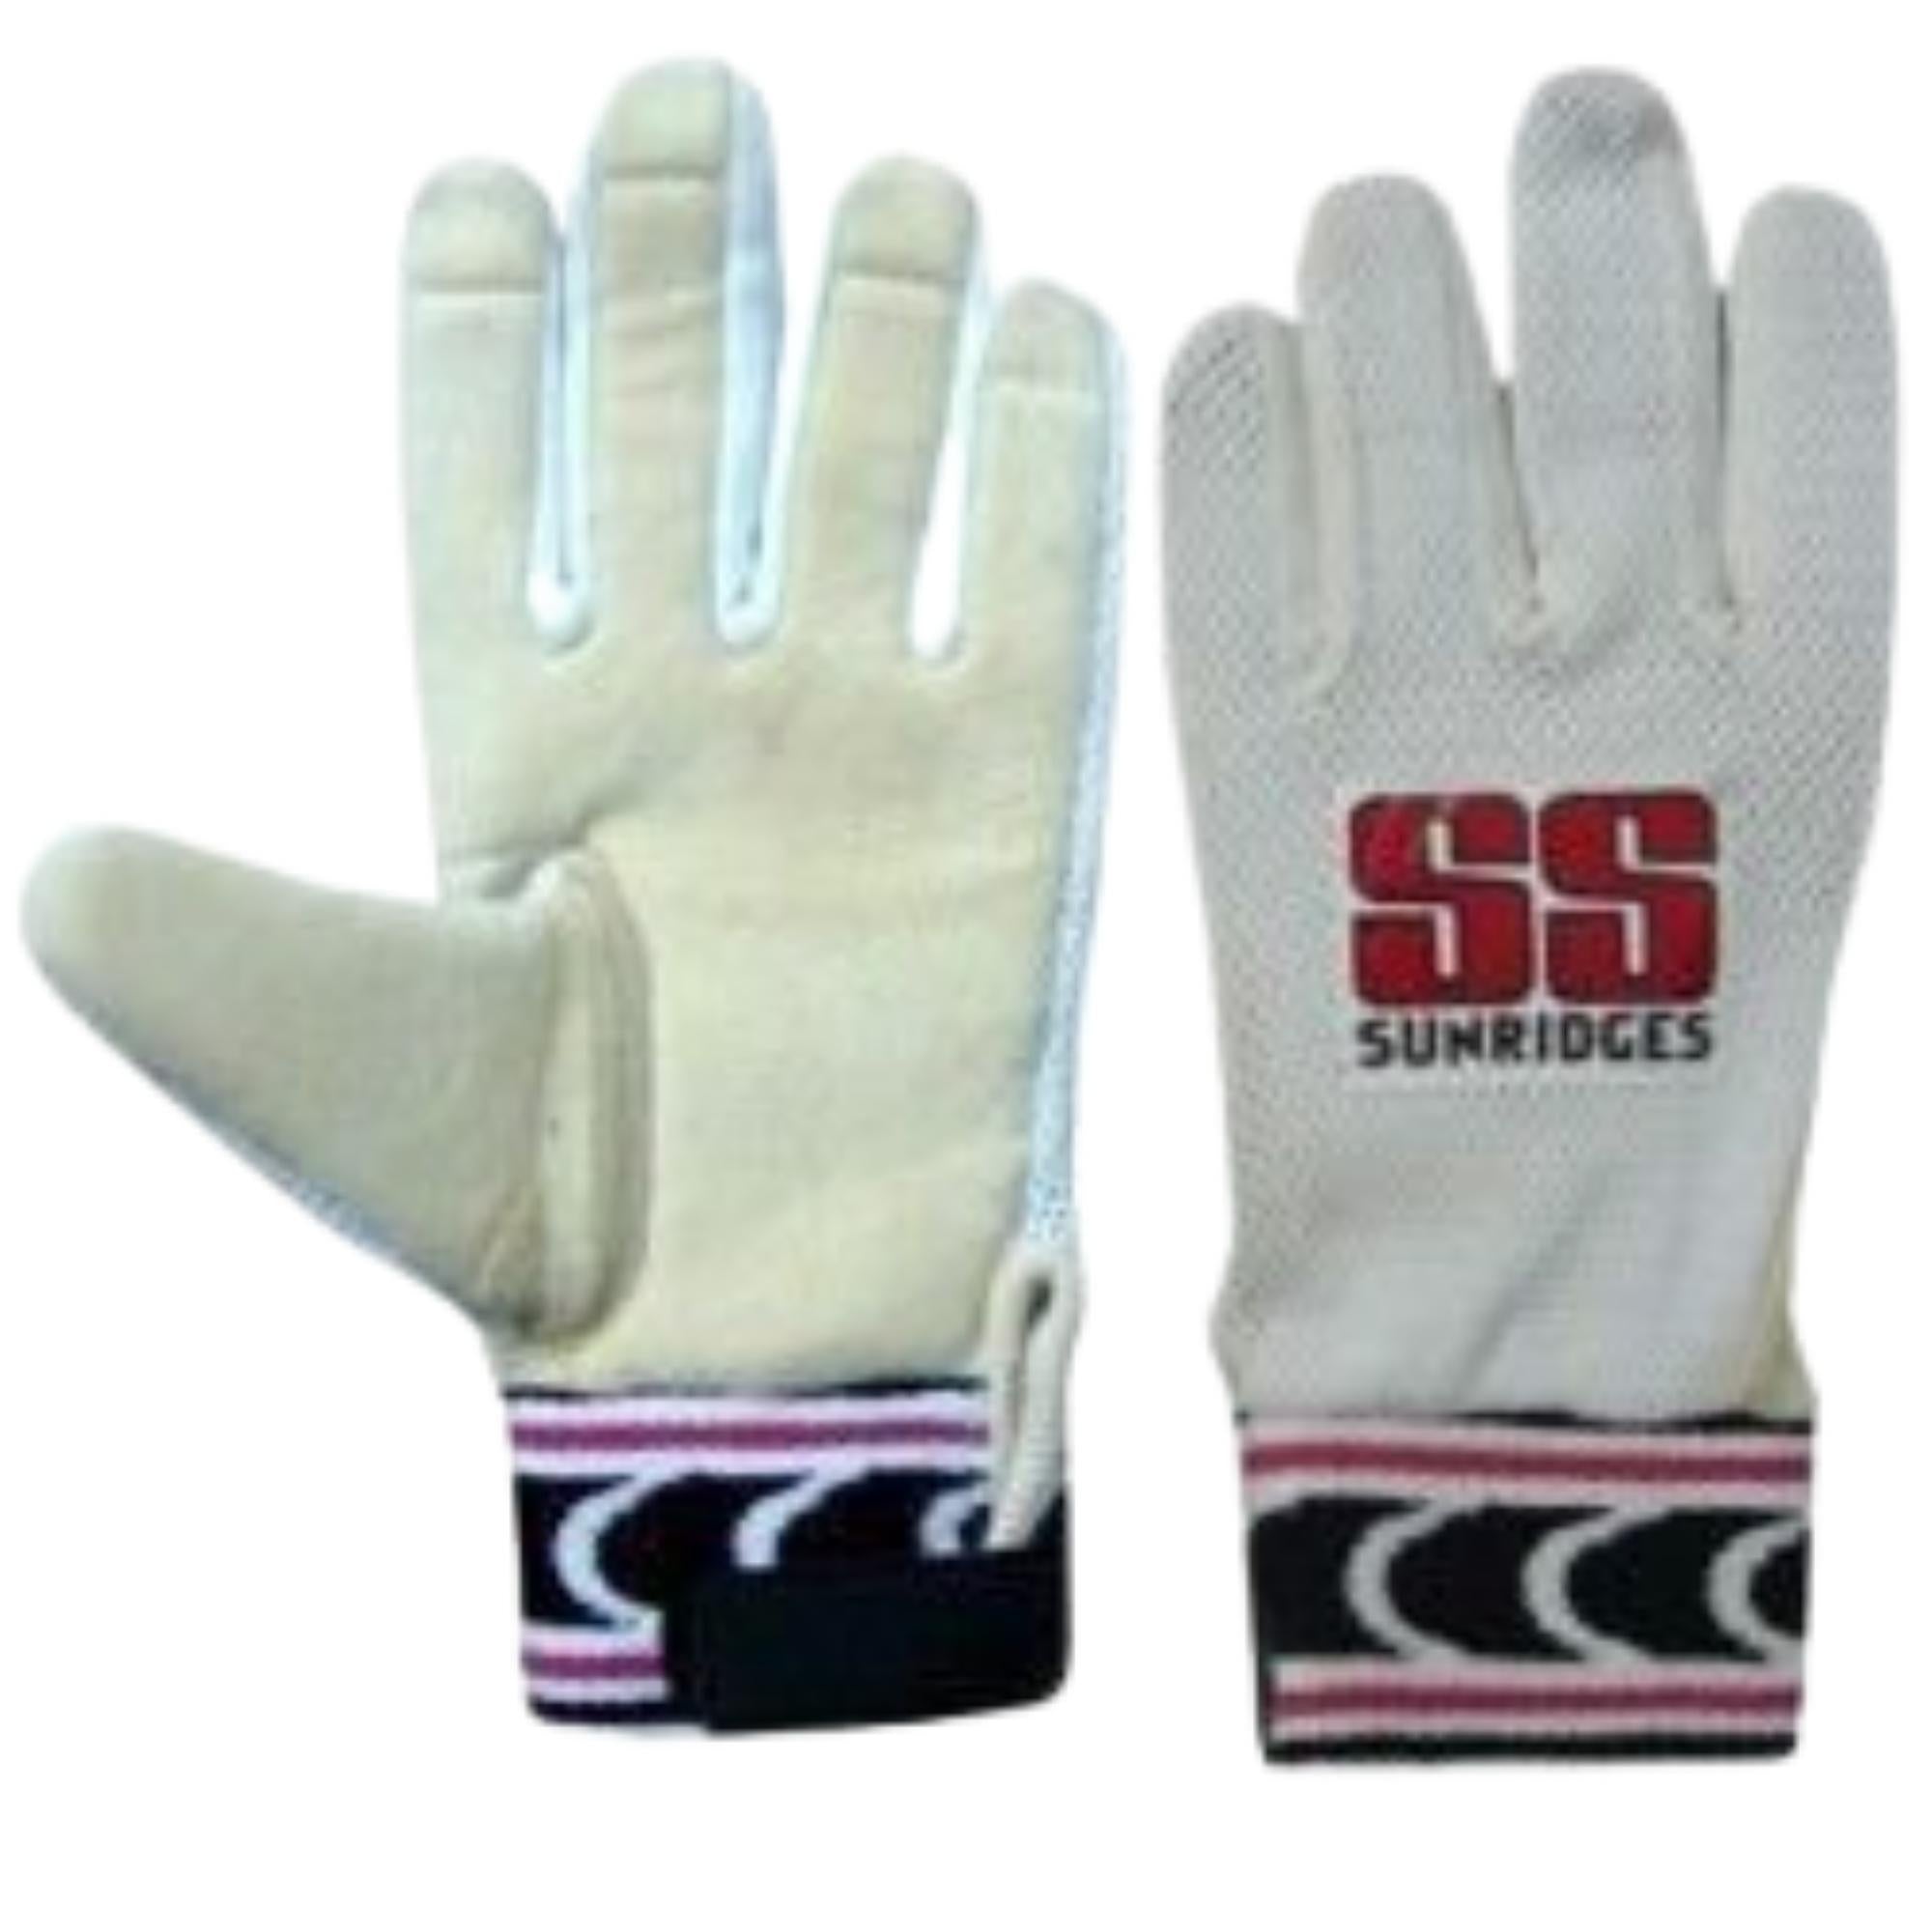 SS Test Wicket Keeping Gloves Inners